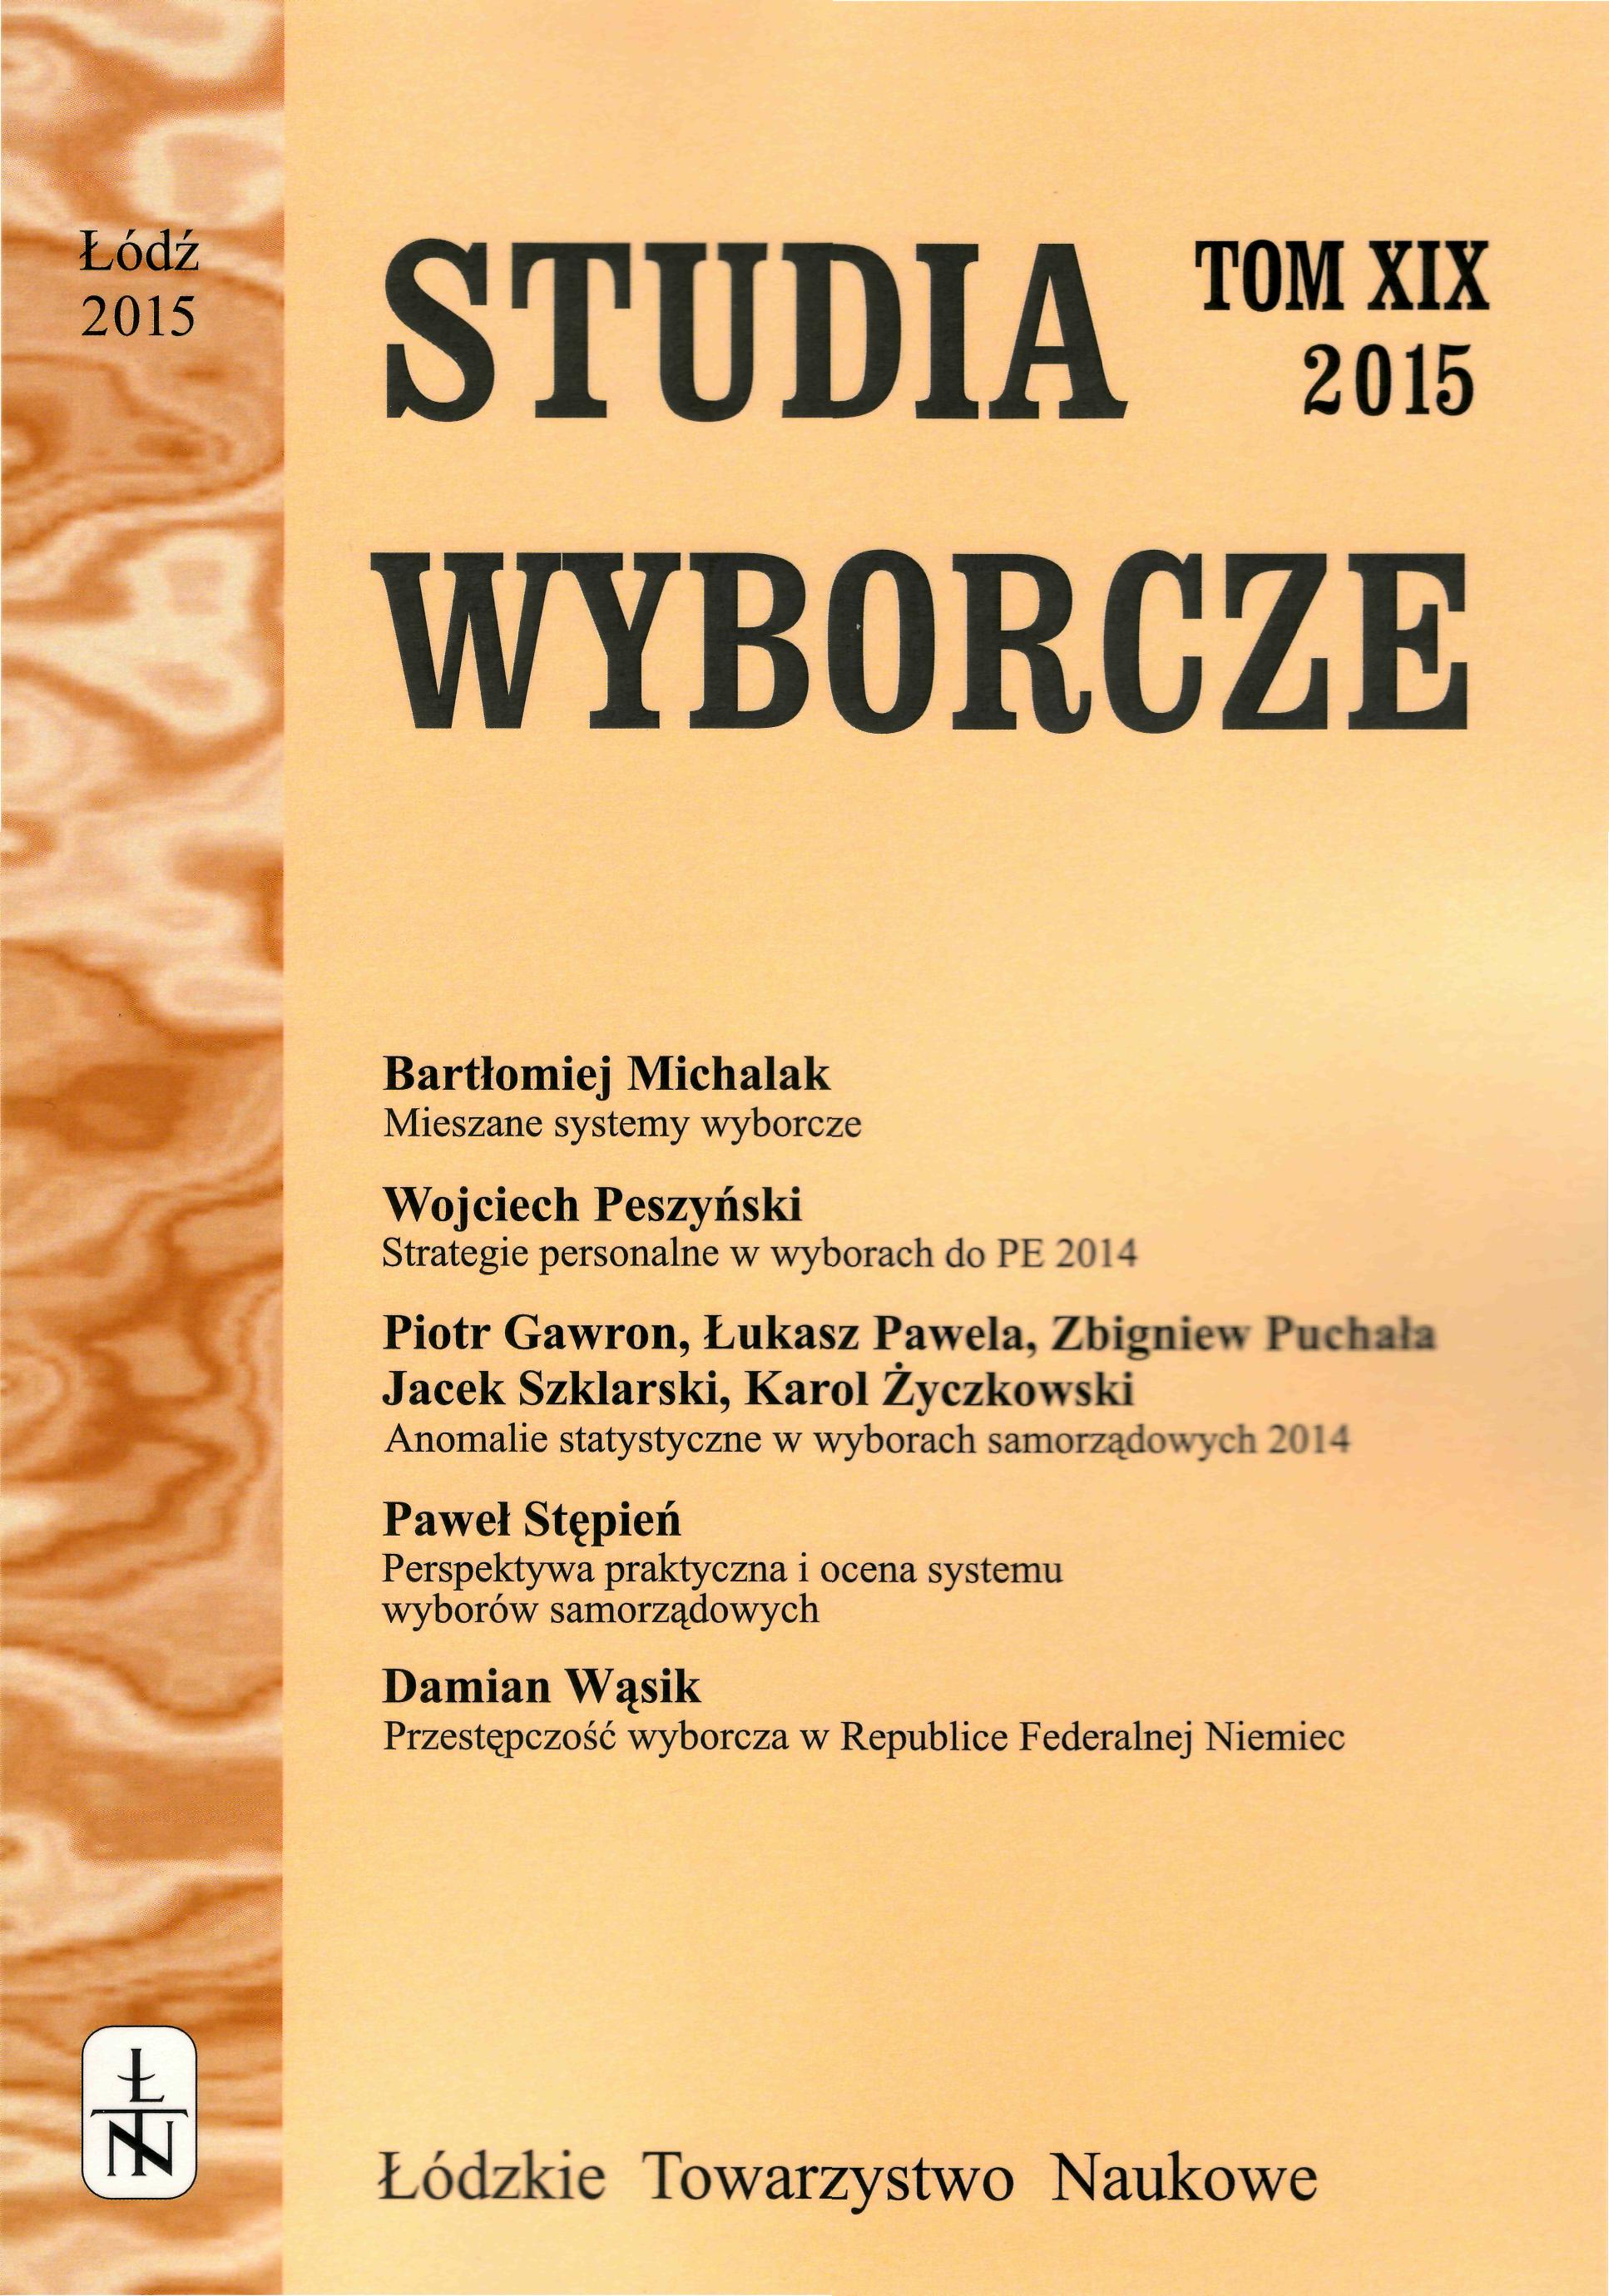 Polish local election in 2014 – the practical perspective and the evaluation of the electoral system Cover Image